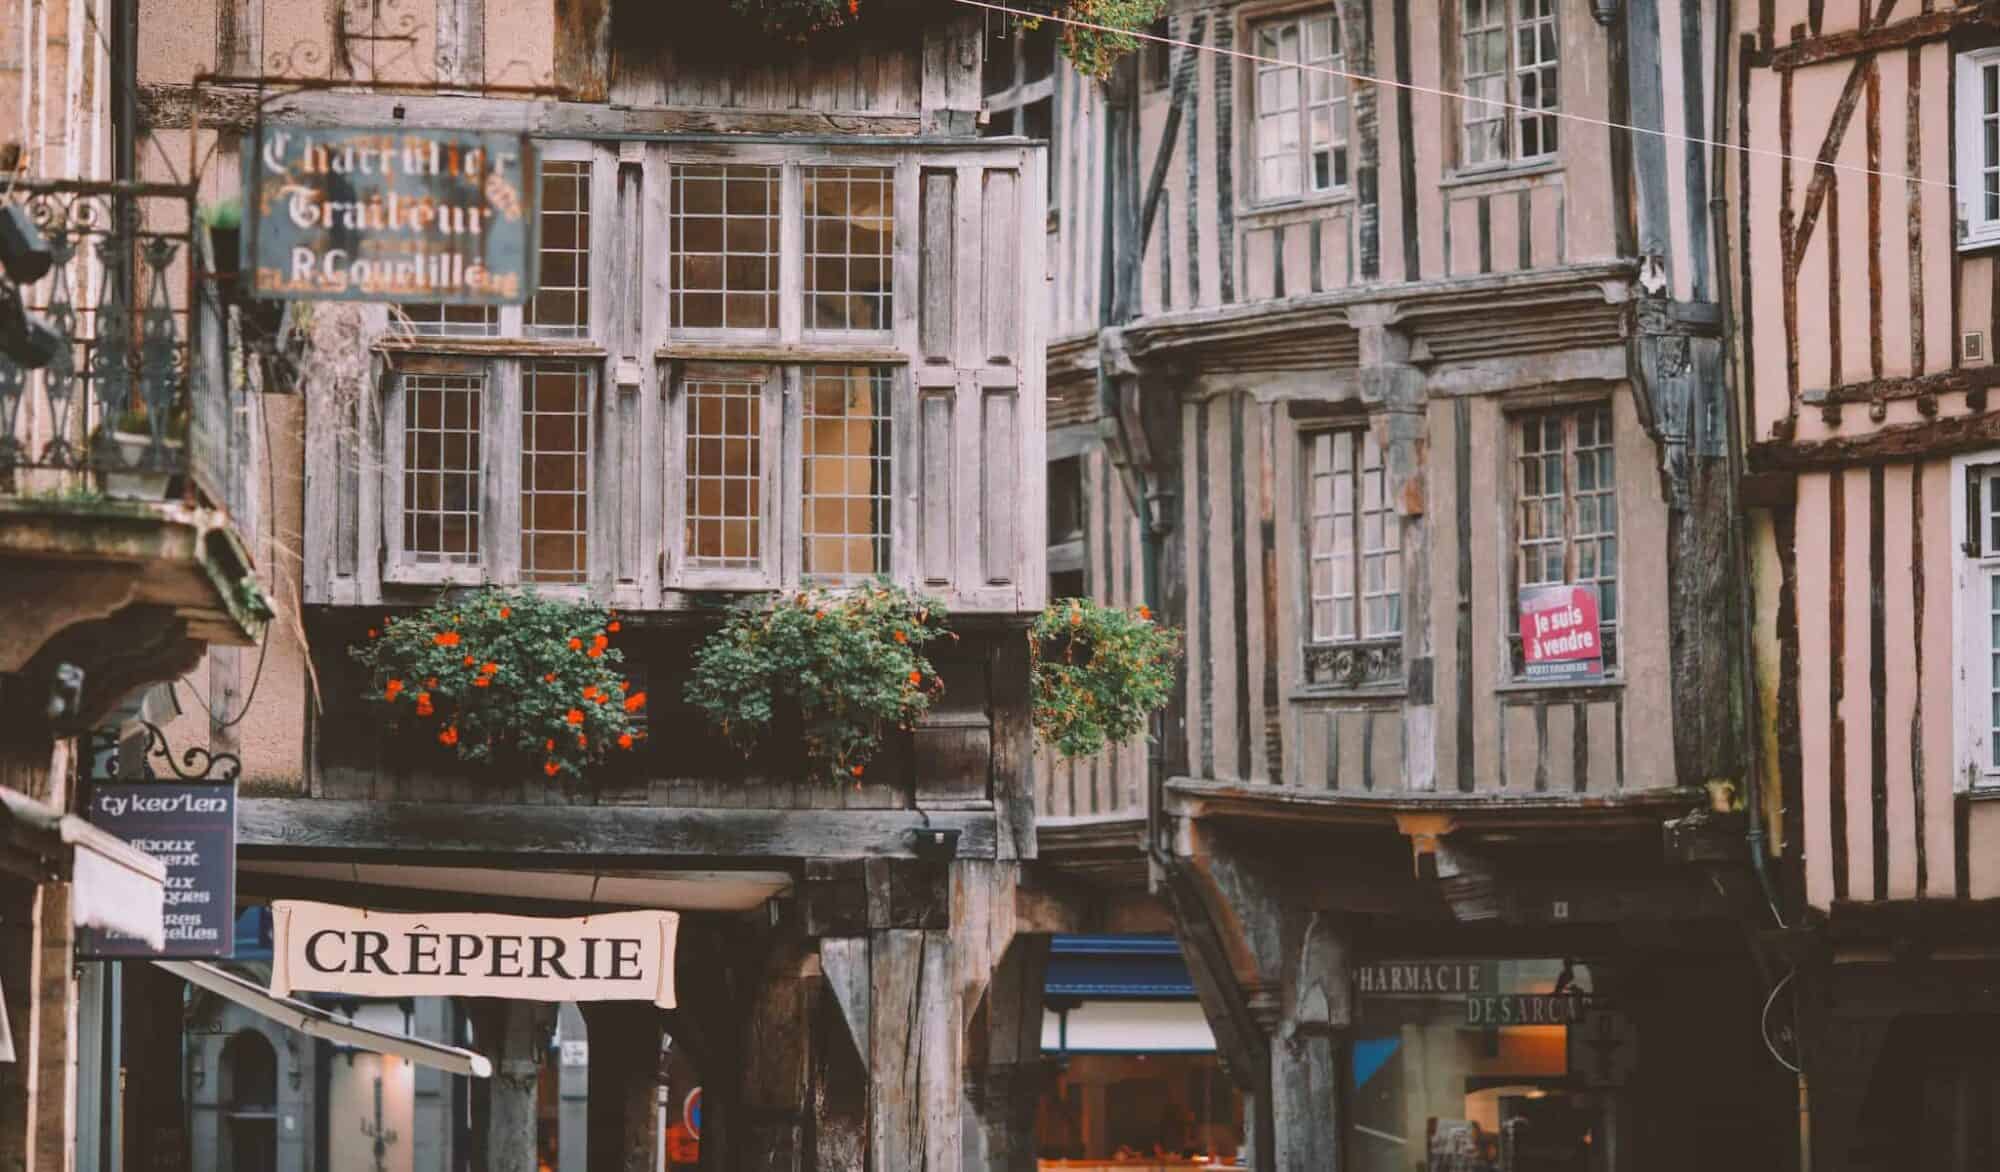 A charming old French town, full of wooden buildings with flowers, with a crepe shop on the left side.